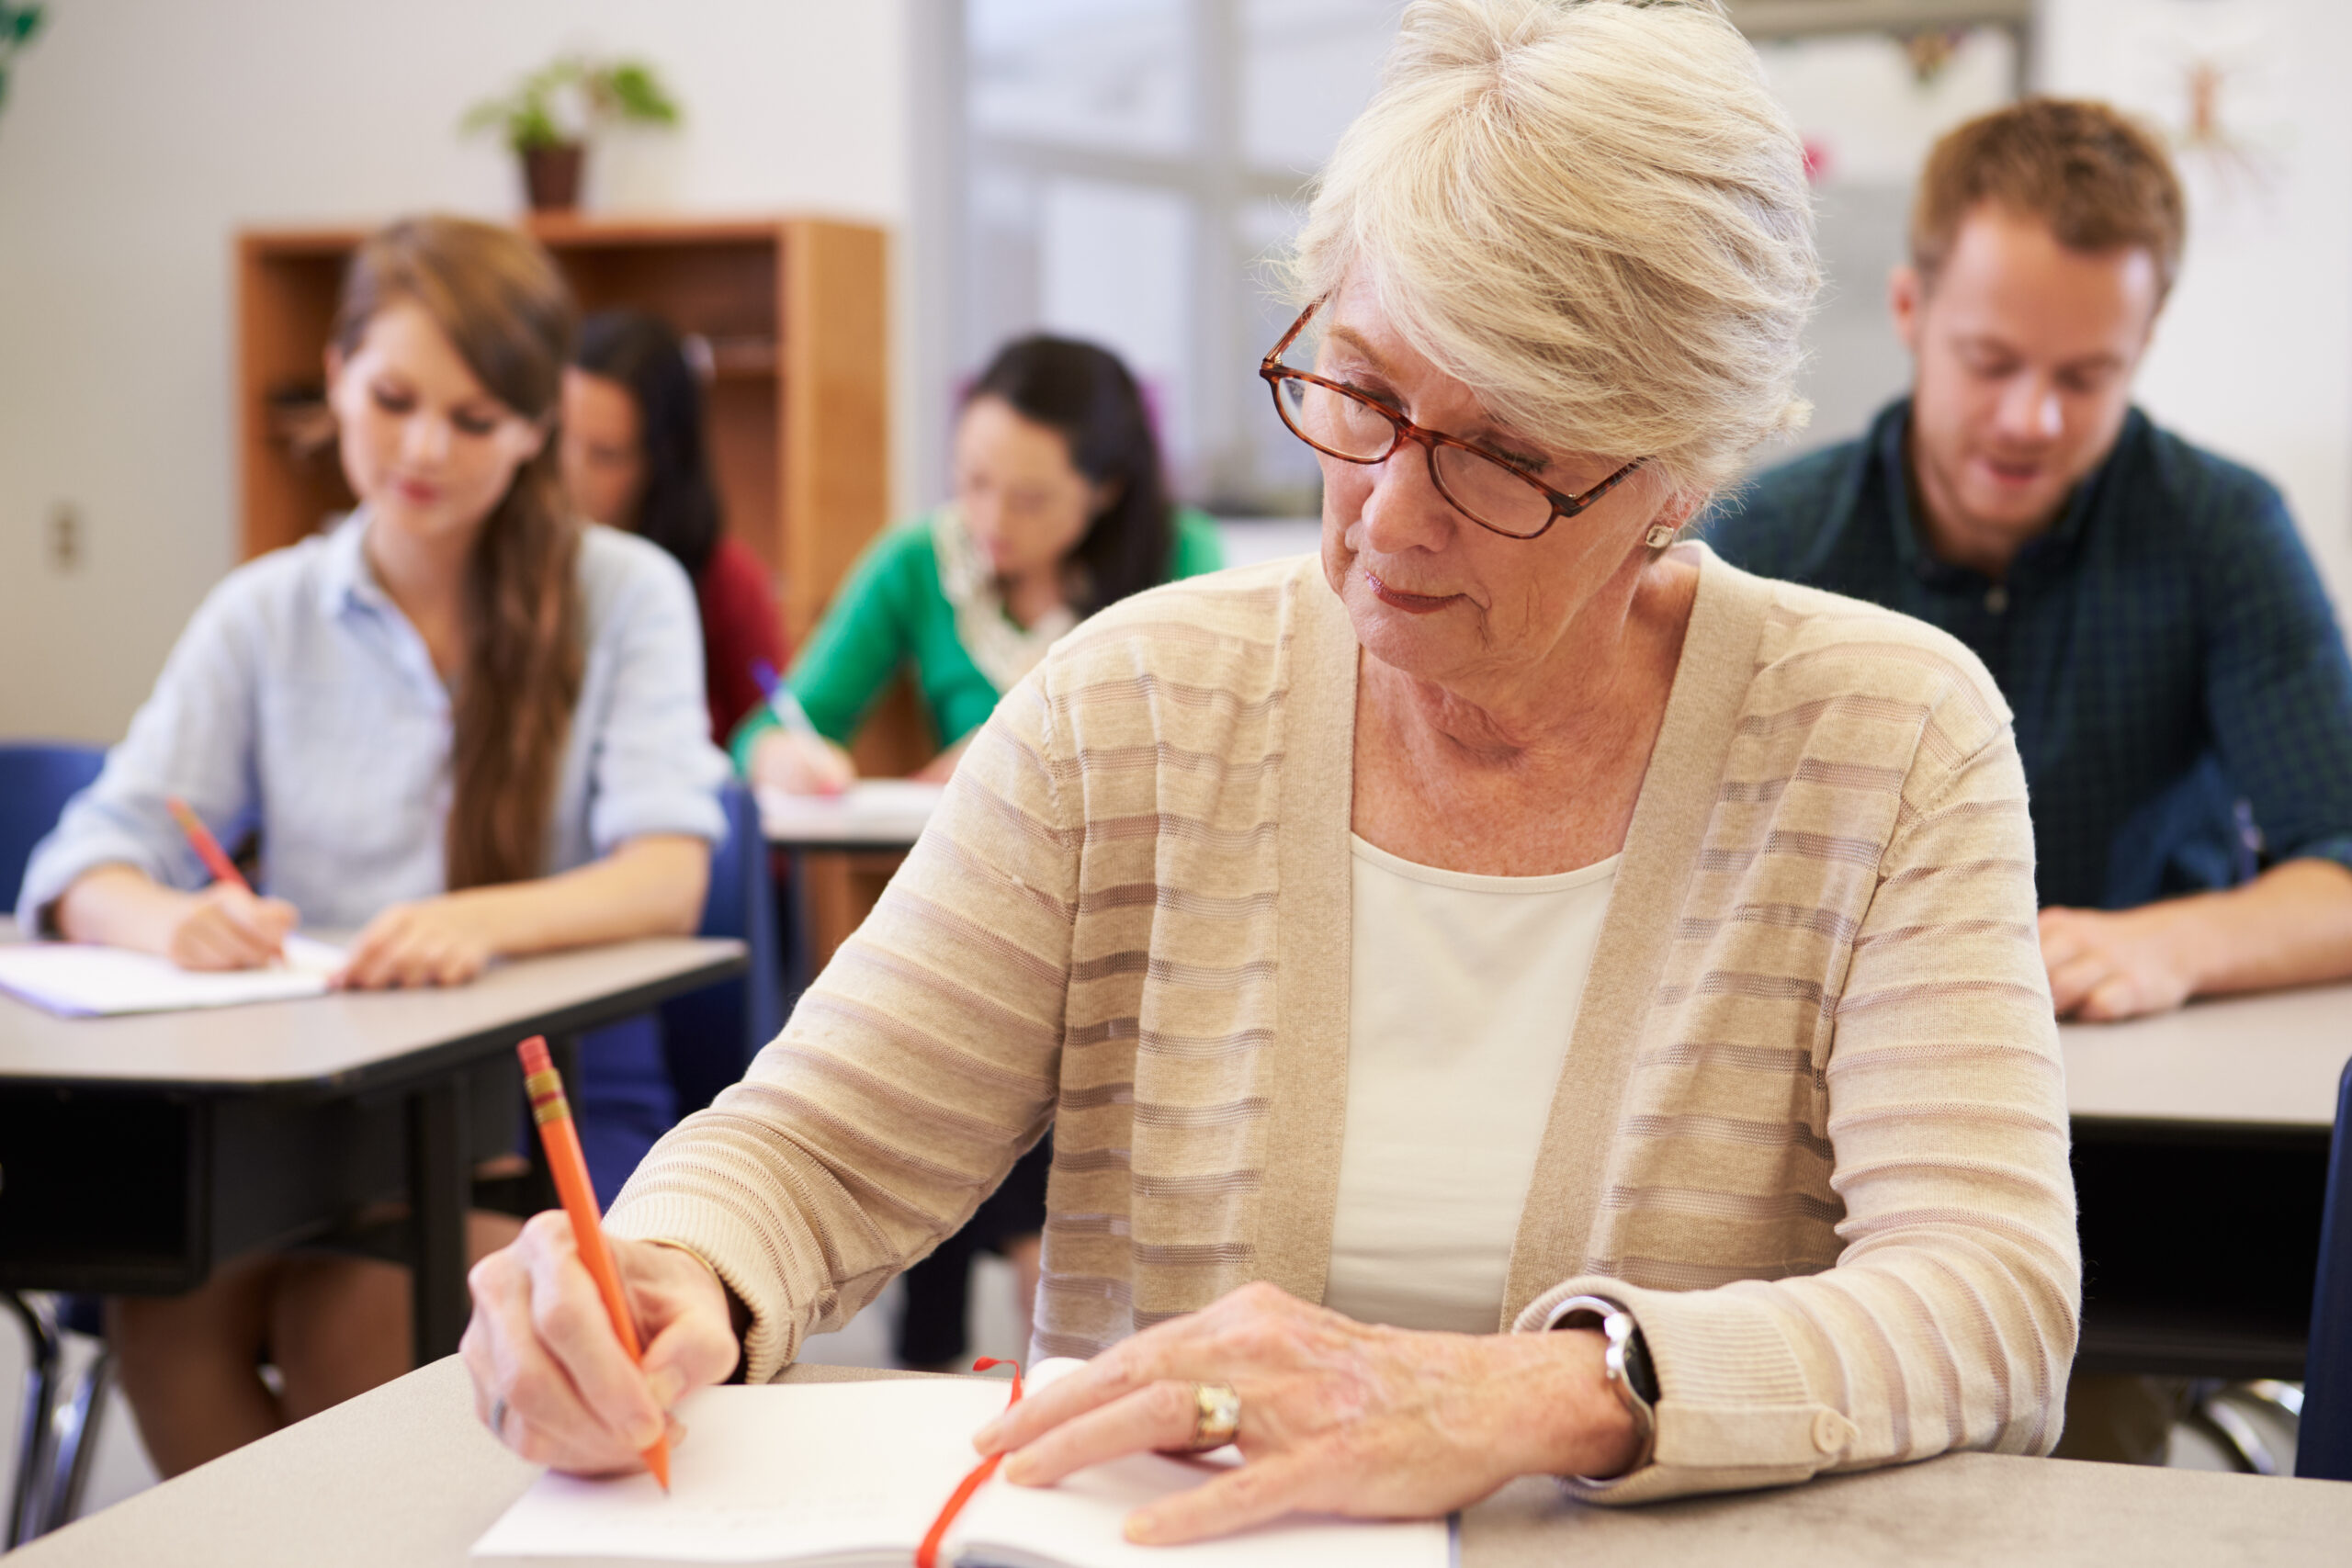 Senior woman leaning at an adult aged care education session